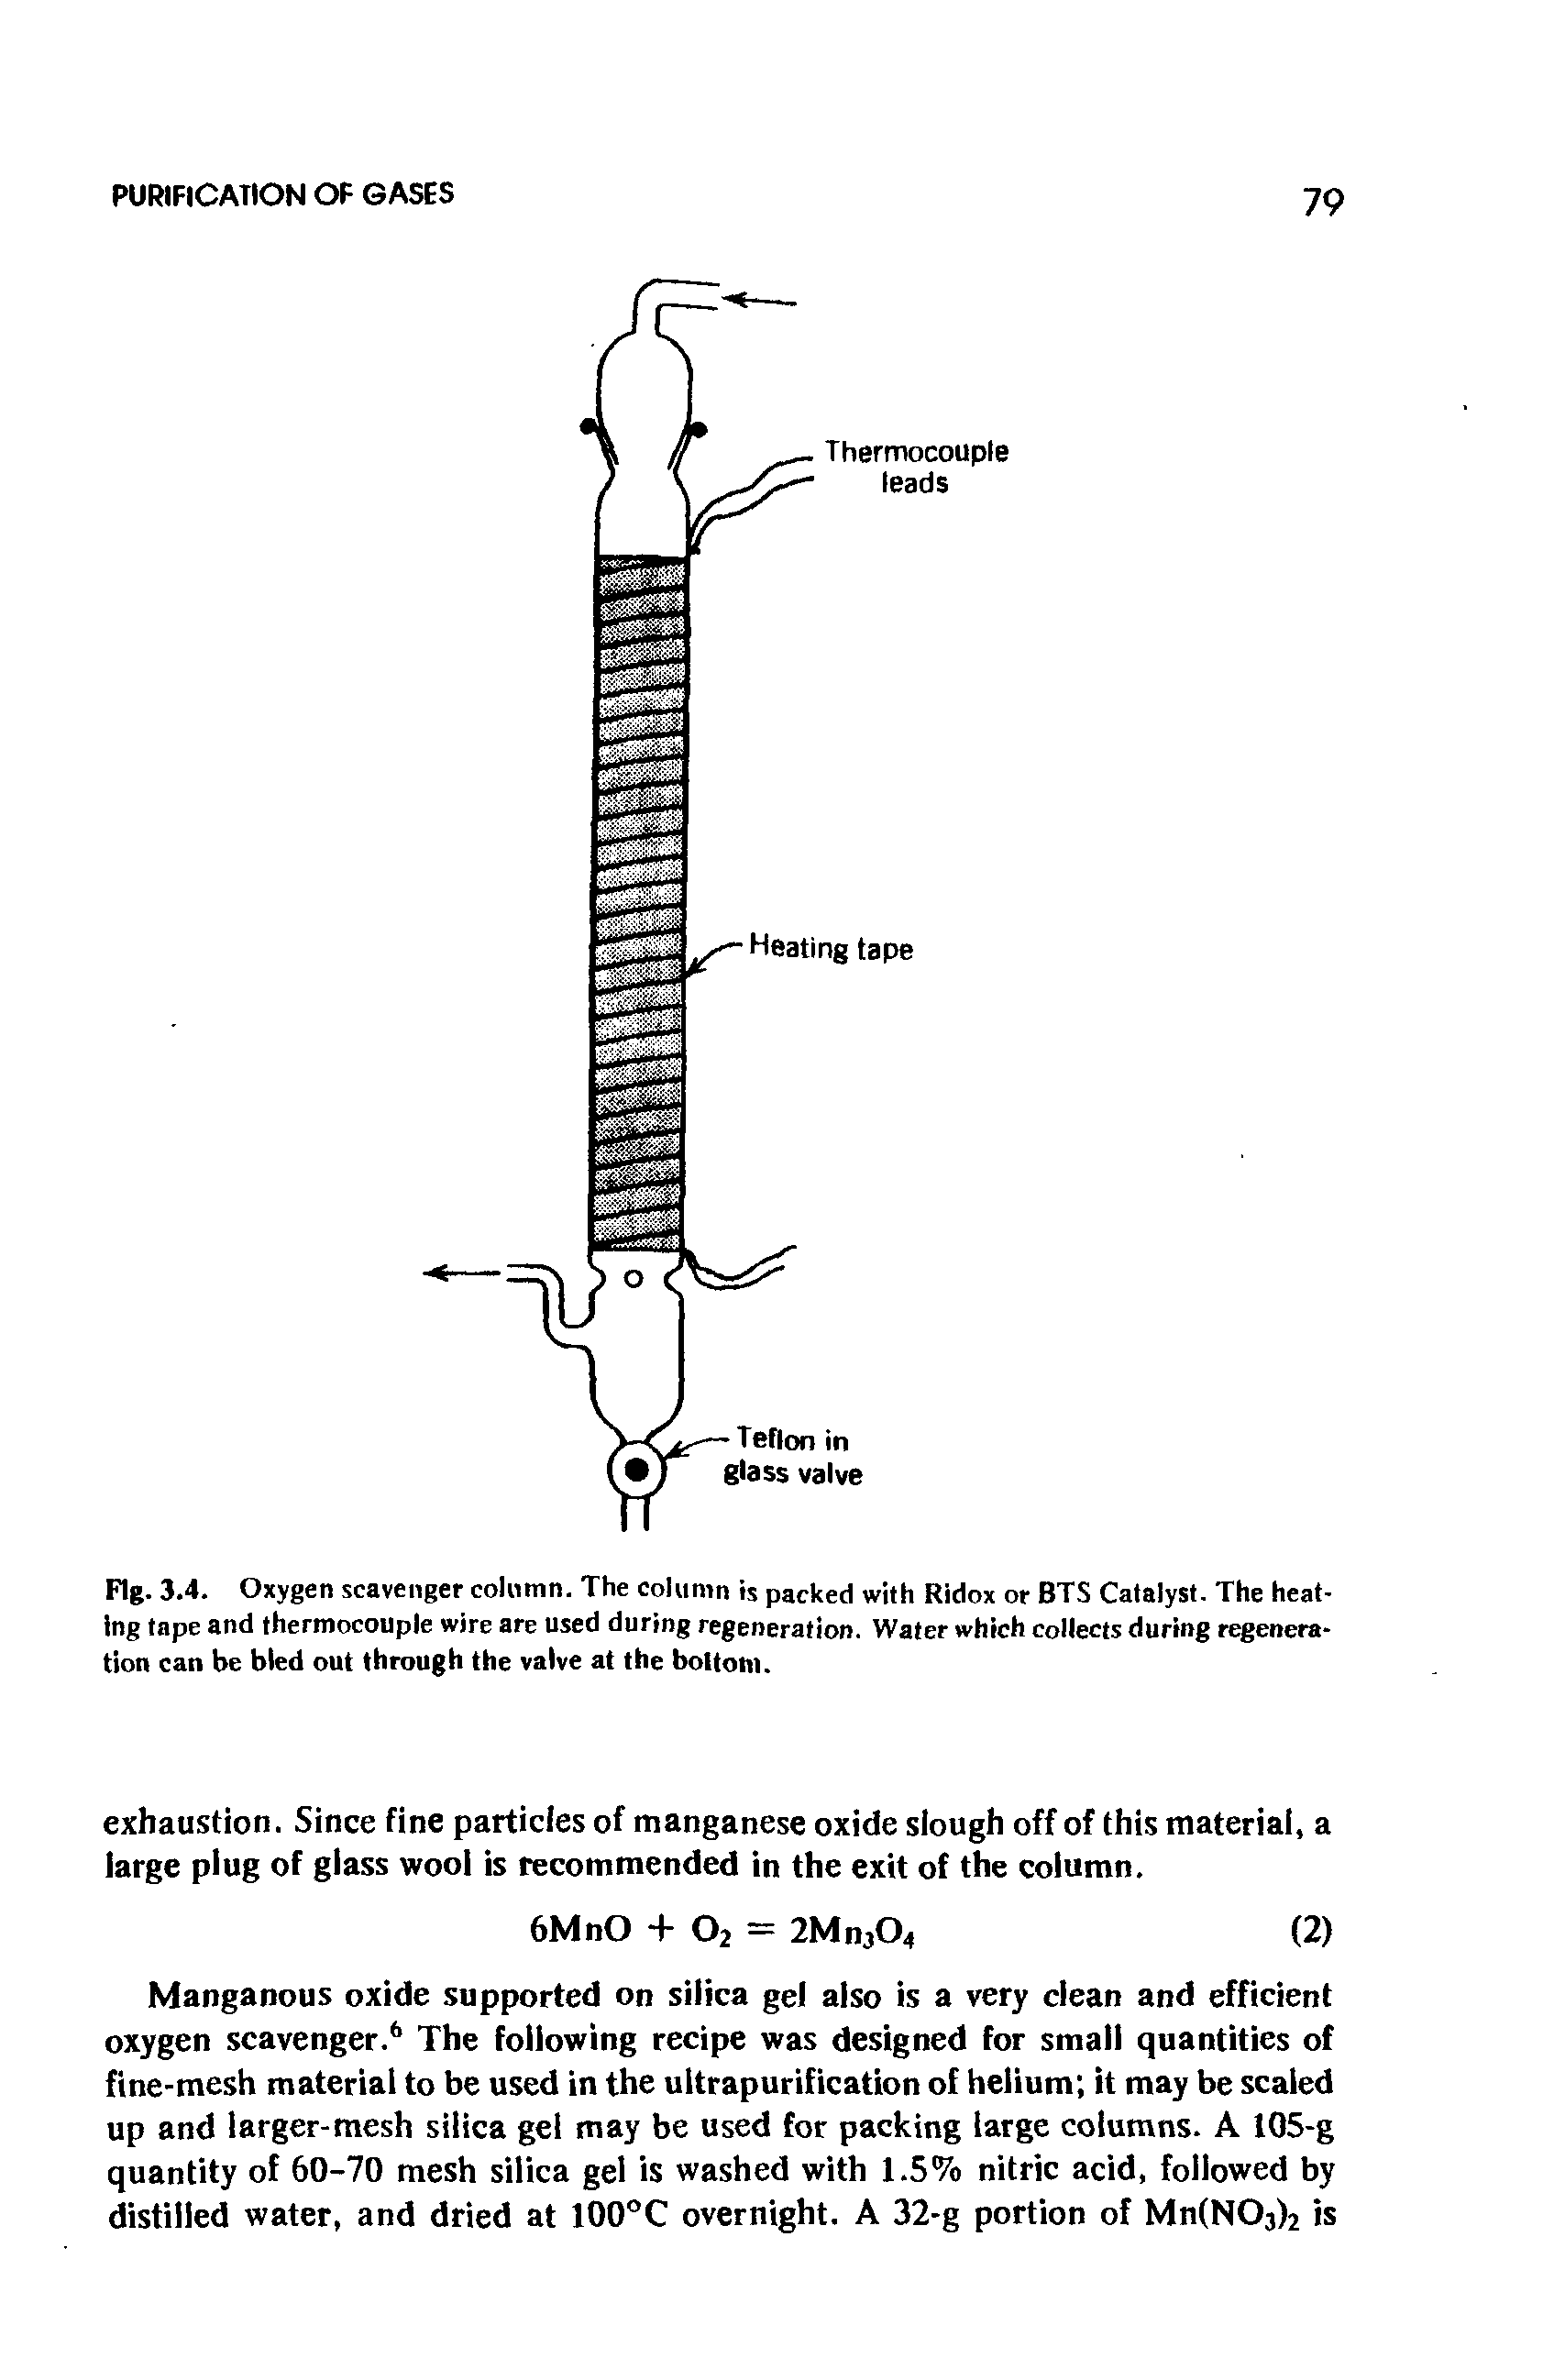 Fig. 3.4. Oxygen scavenger column. The column is packed with Ridox or BTS Catalyst. The heating tape and thermocouple wire are used during regeneration. Water which collects during regeneration can be bled out through the valve at the bottom.